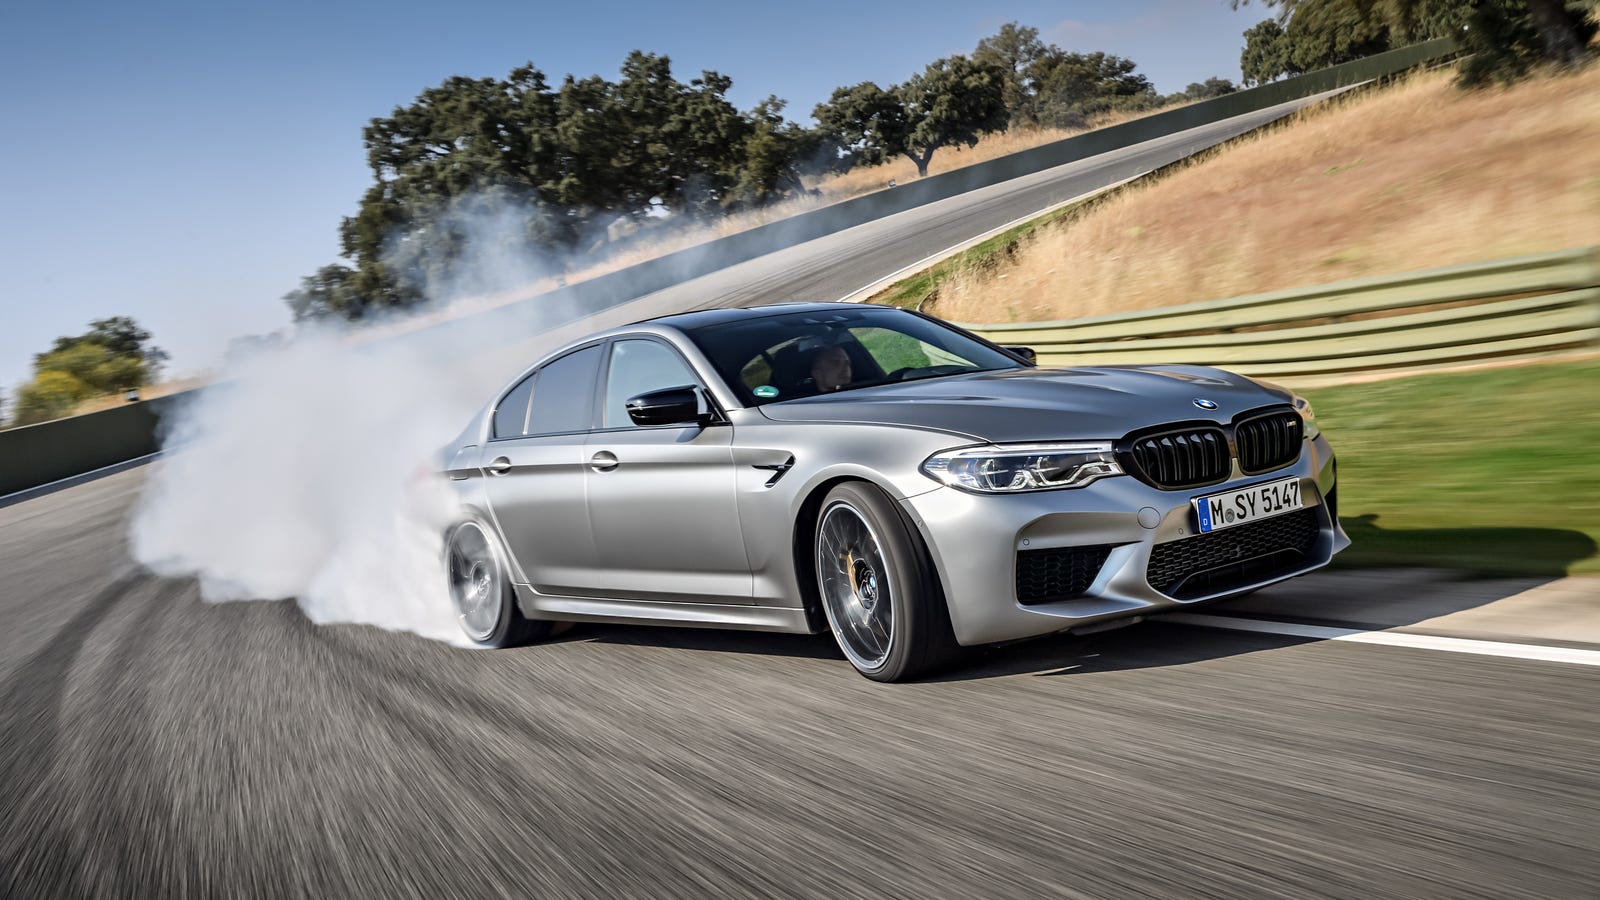 The BMW M5 Competition Has Almost as Much Horsepower as the McLaren F1